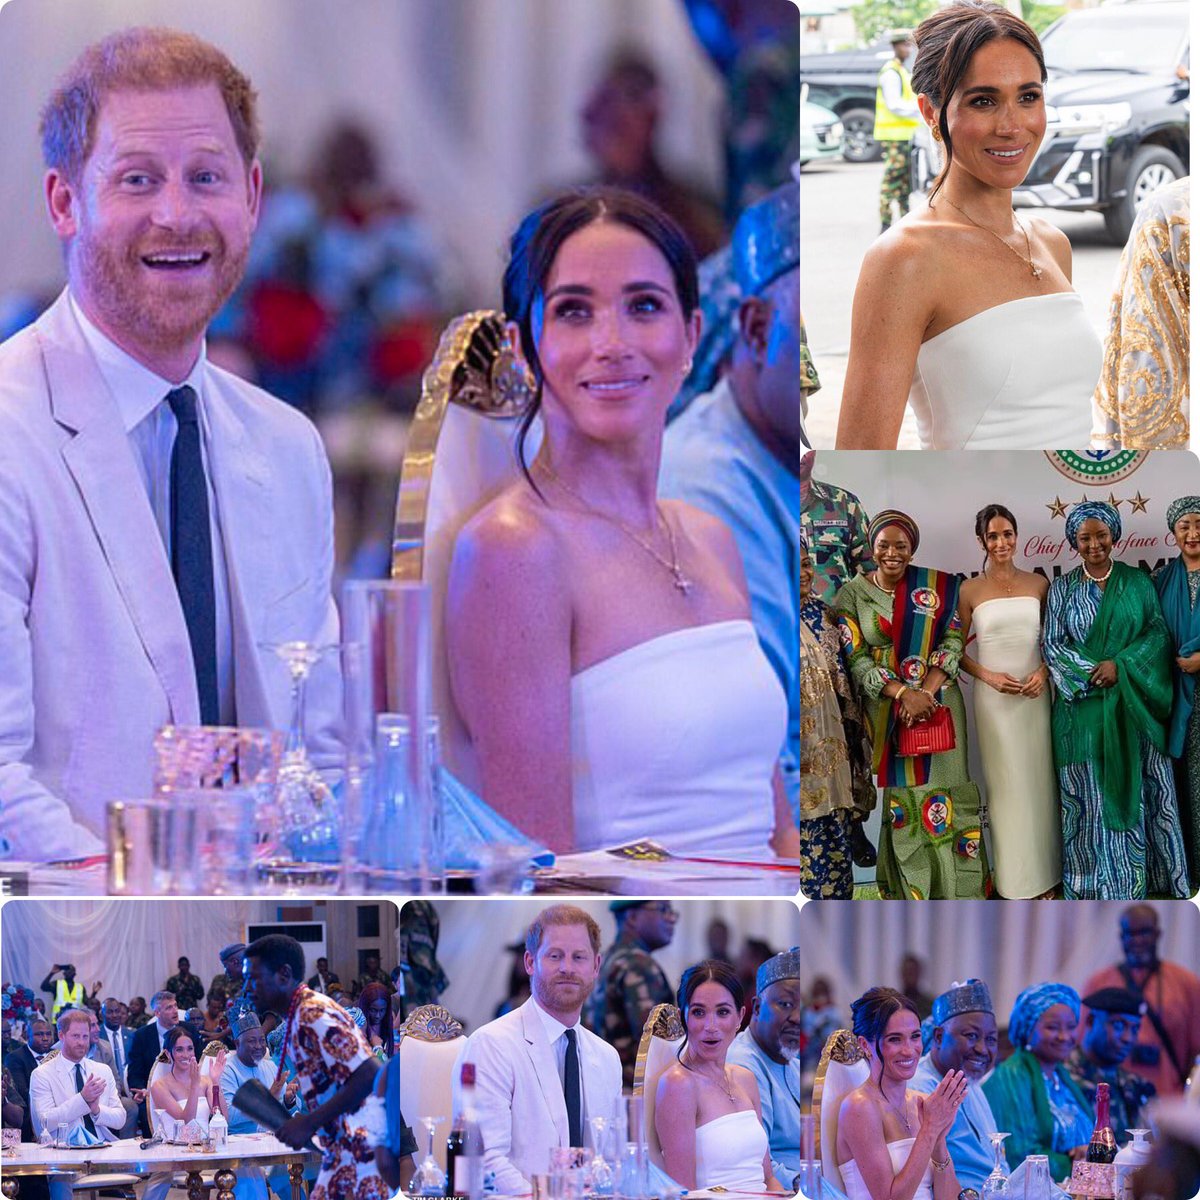 DAY 2 #HarryAndMeghanInNigeria Prince Harry and Princess Meghan doing the hubby and wife matching white look at a reception held for them last night in Abuja, Nigeria. 🇳🇬